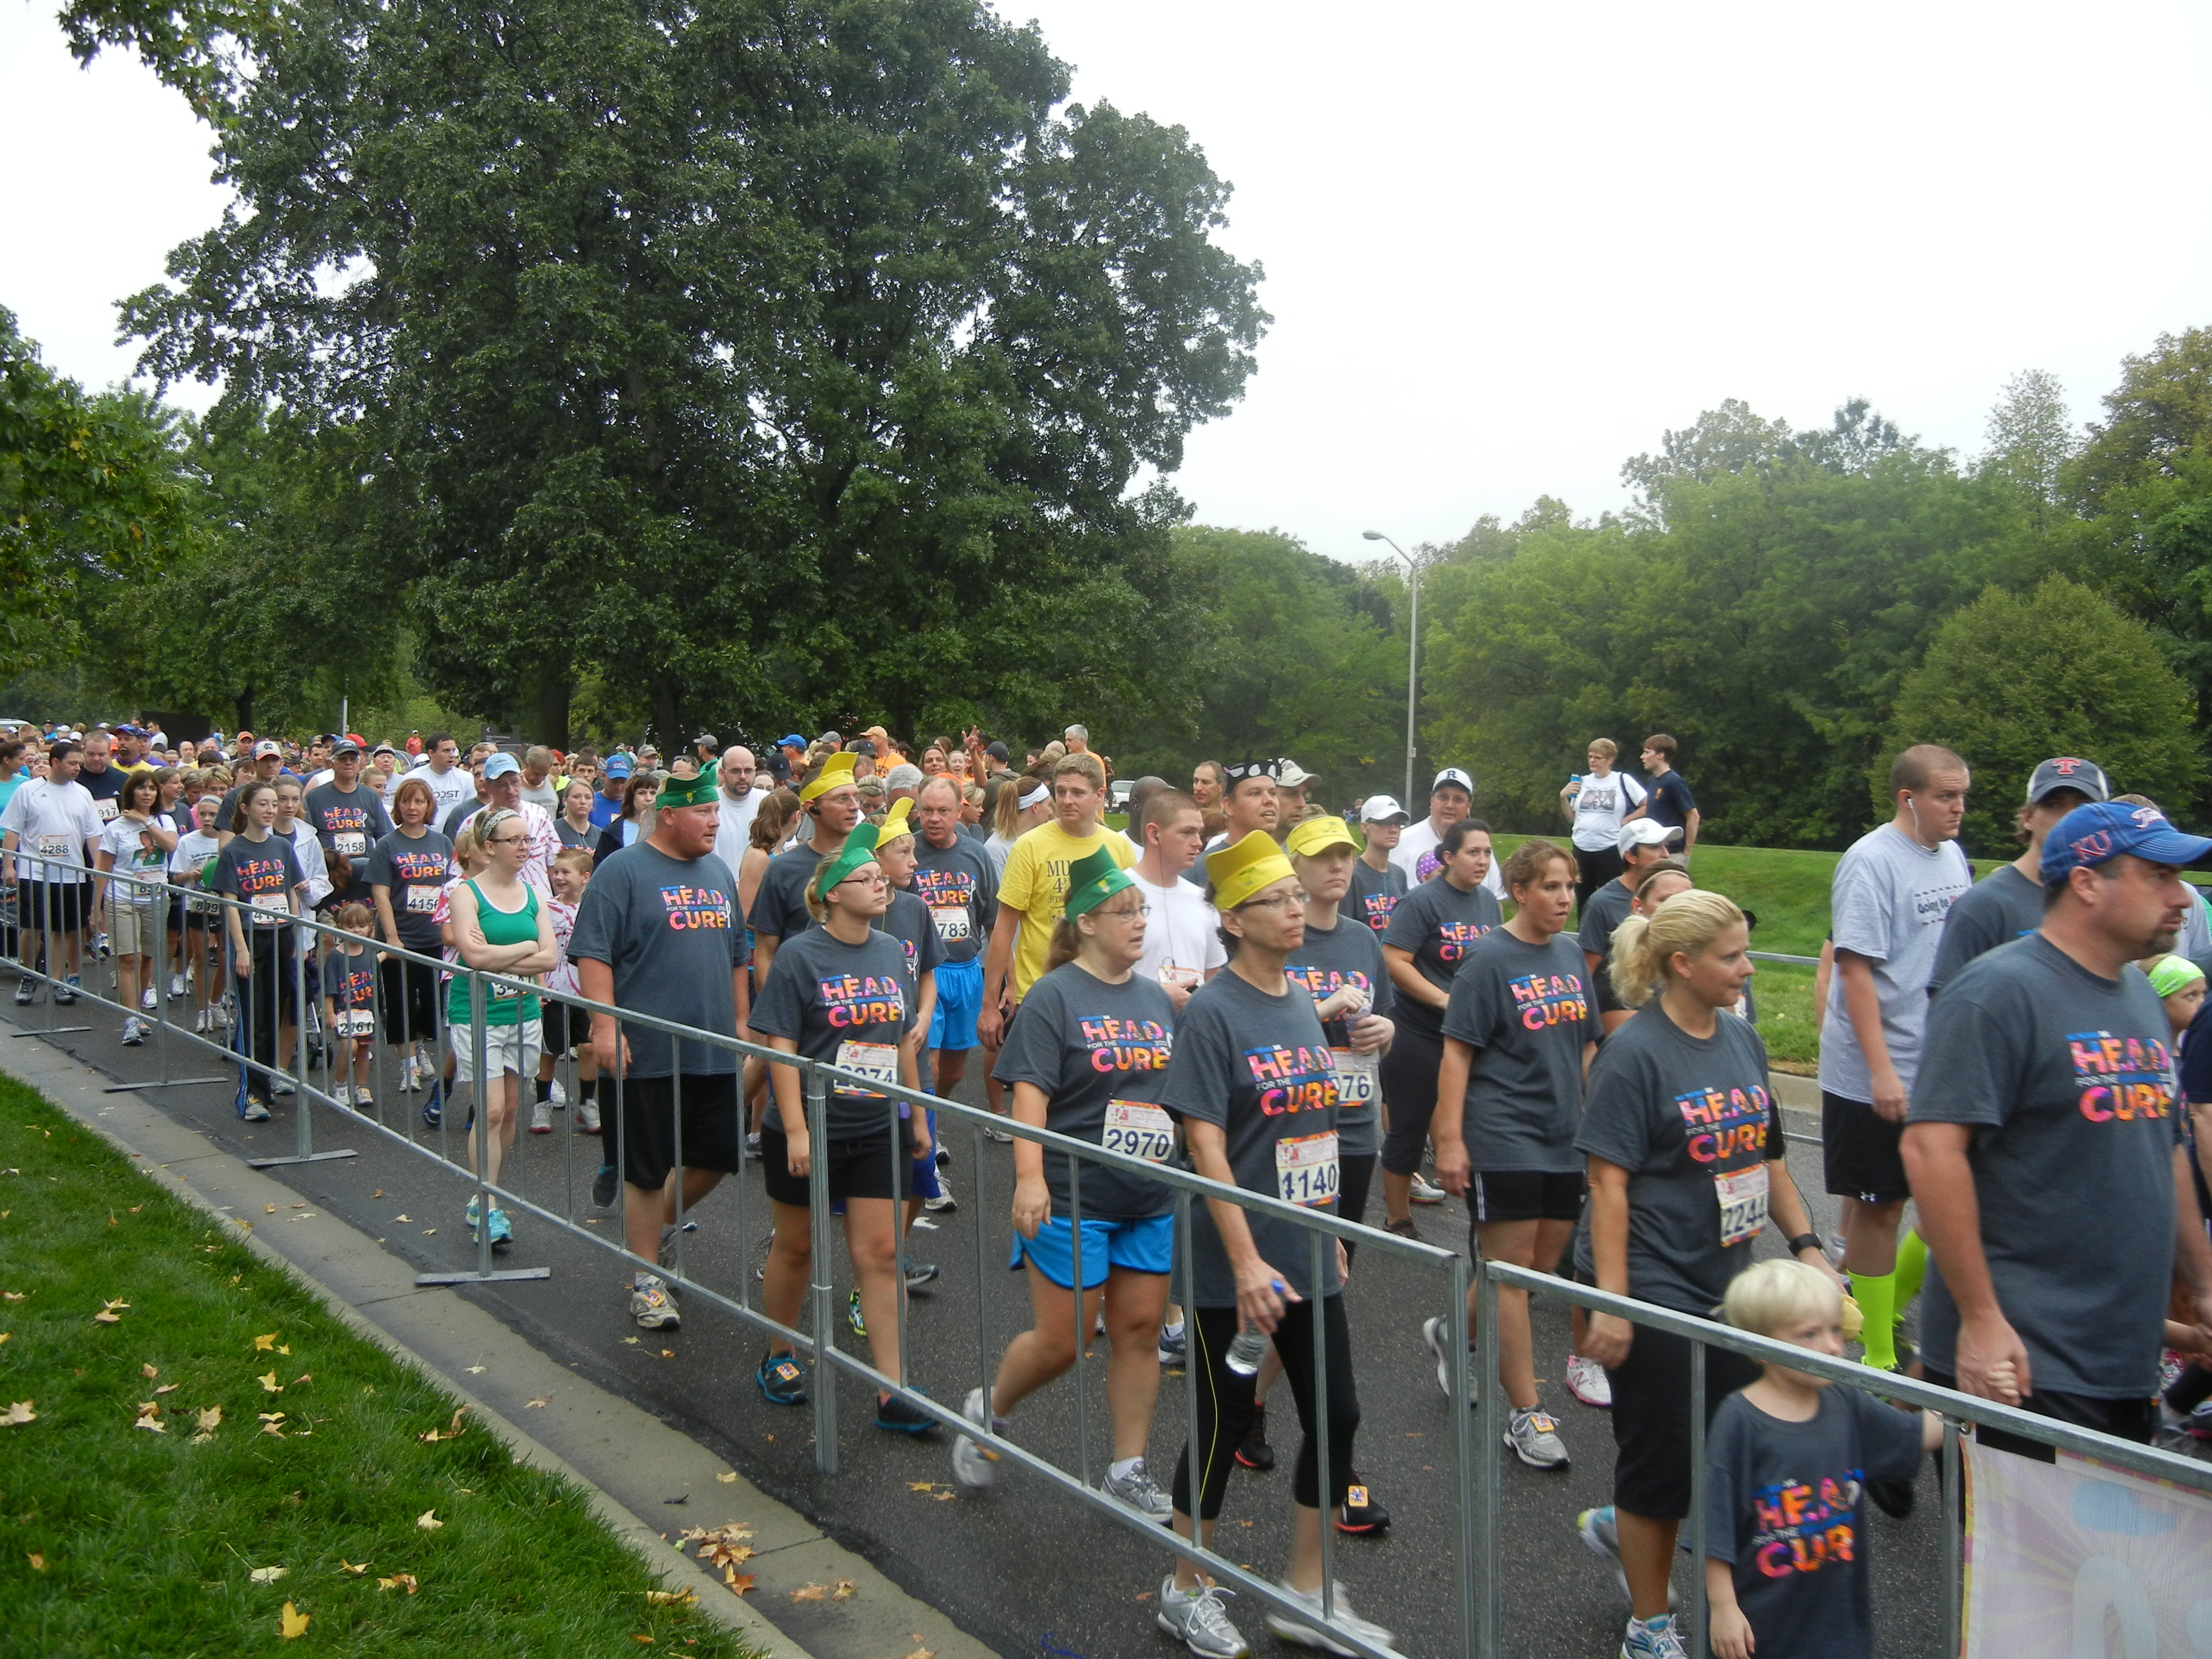 Walkers at the Head for the Cure 2012